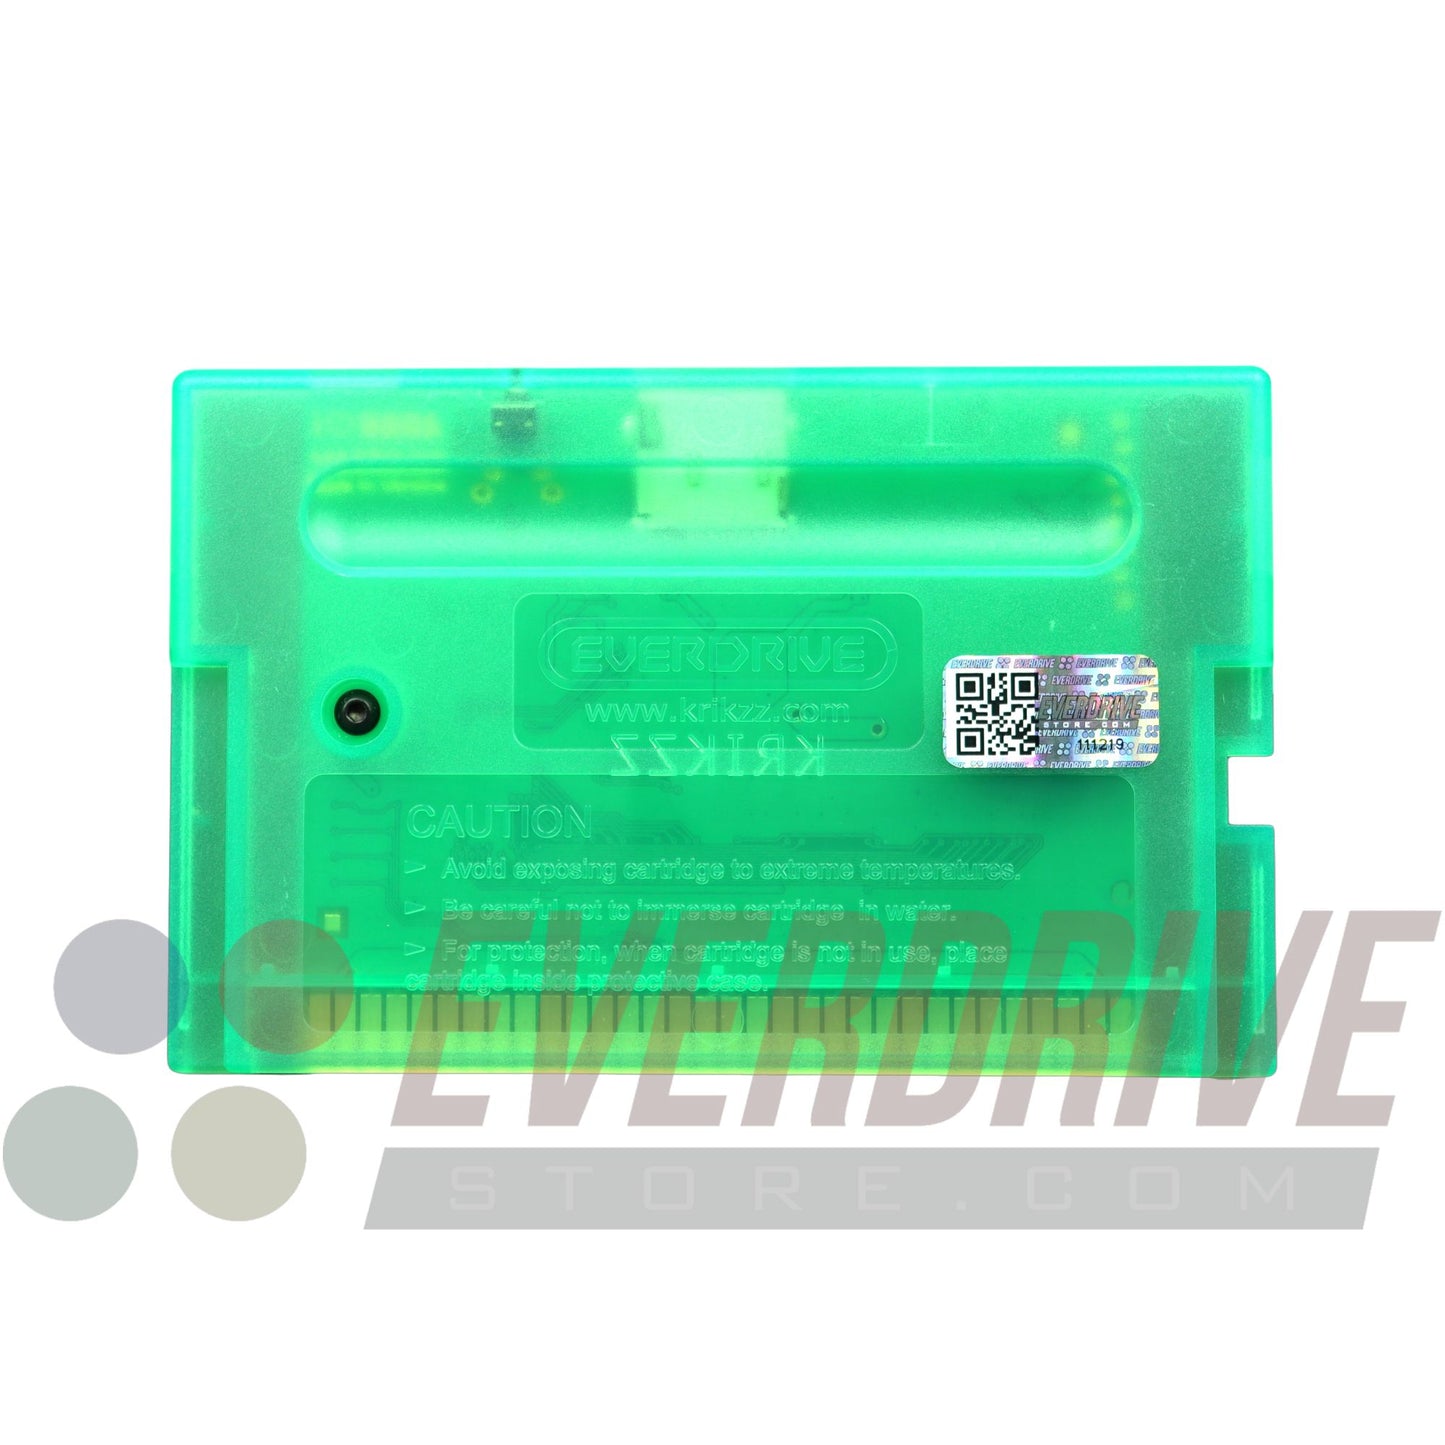 Mega Everdrive X5 - Frosted Green